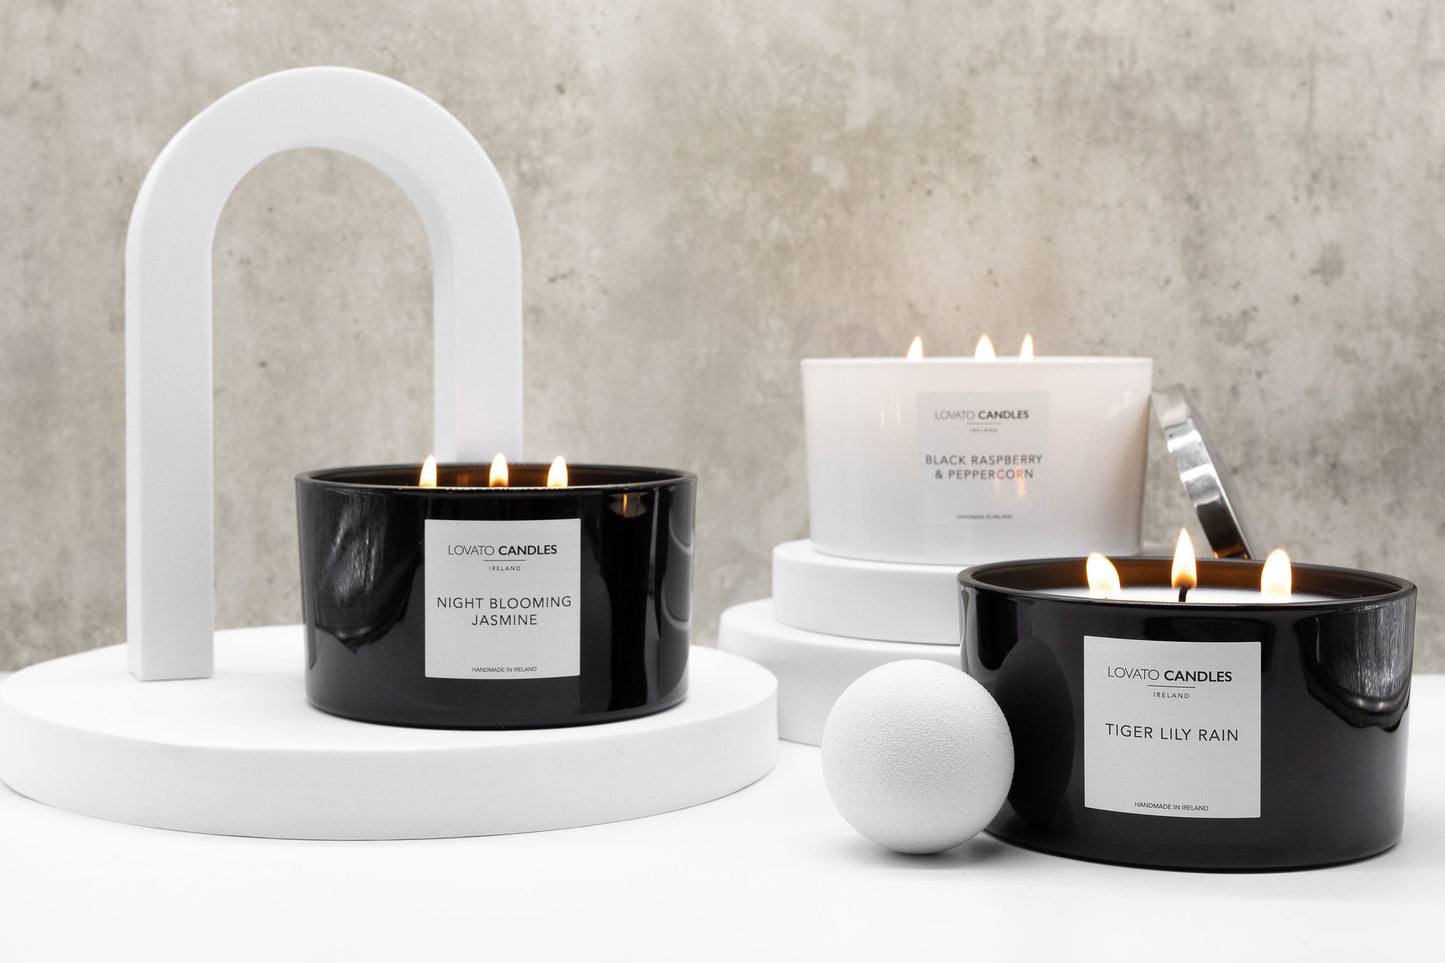 White 3-Wick Candle - Parisienne Spring